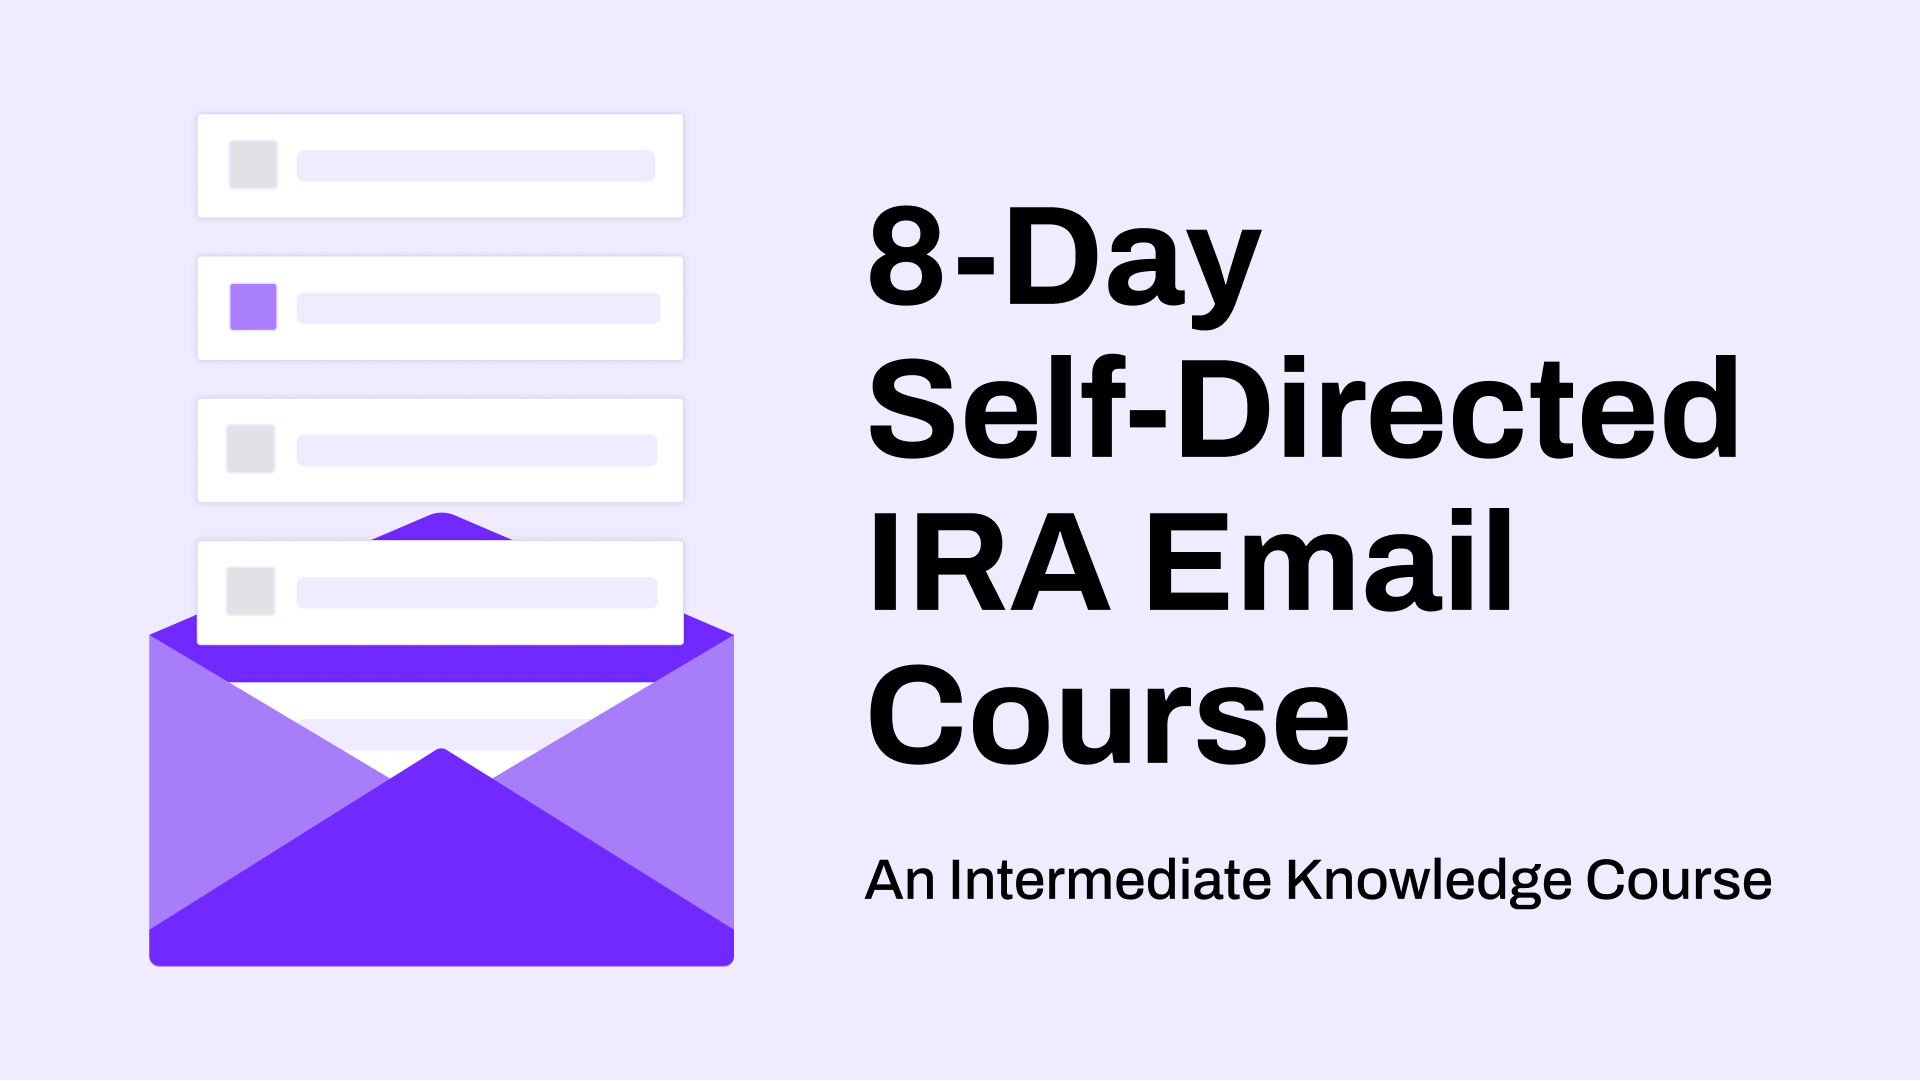 8-Day Self-Directed IRA Email Course